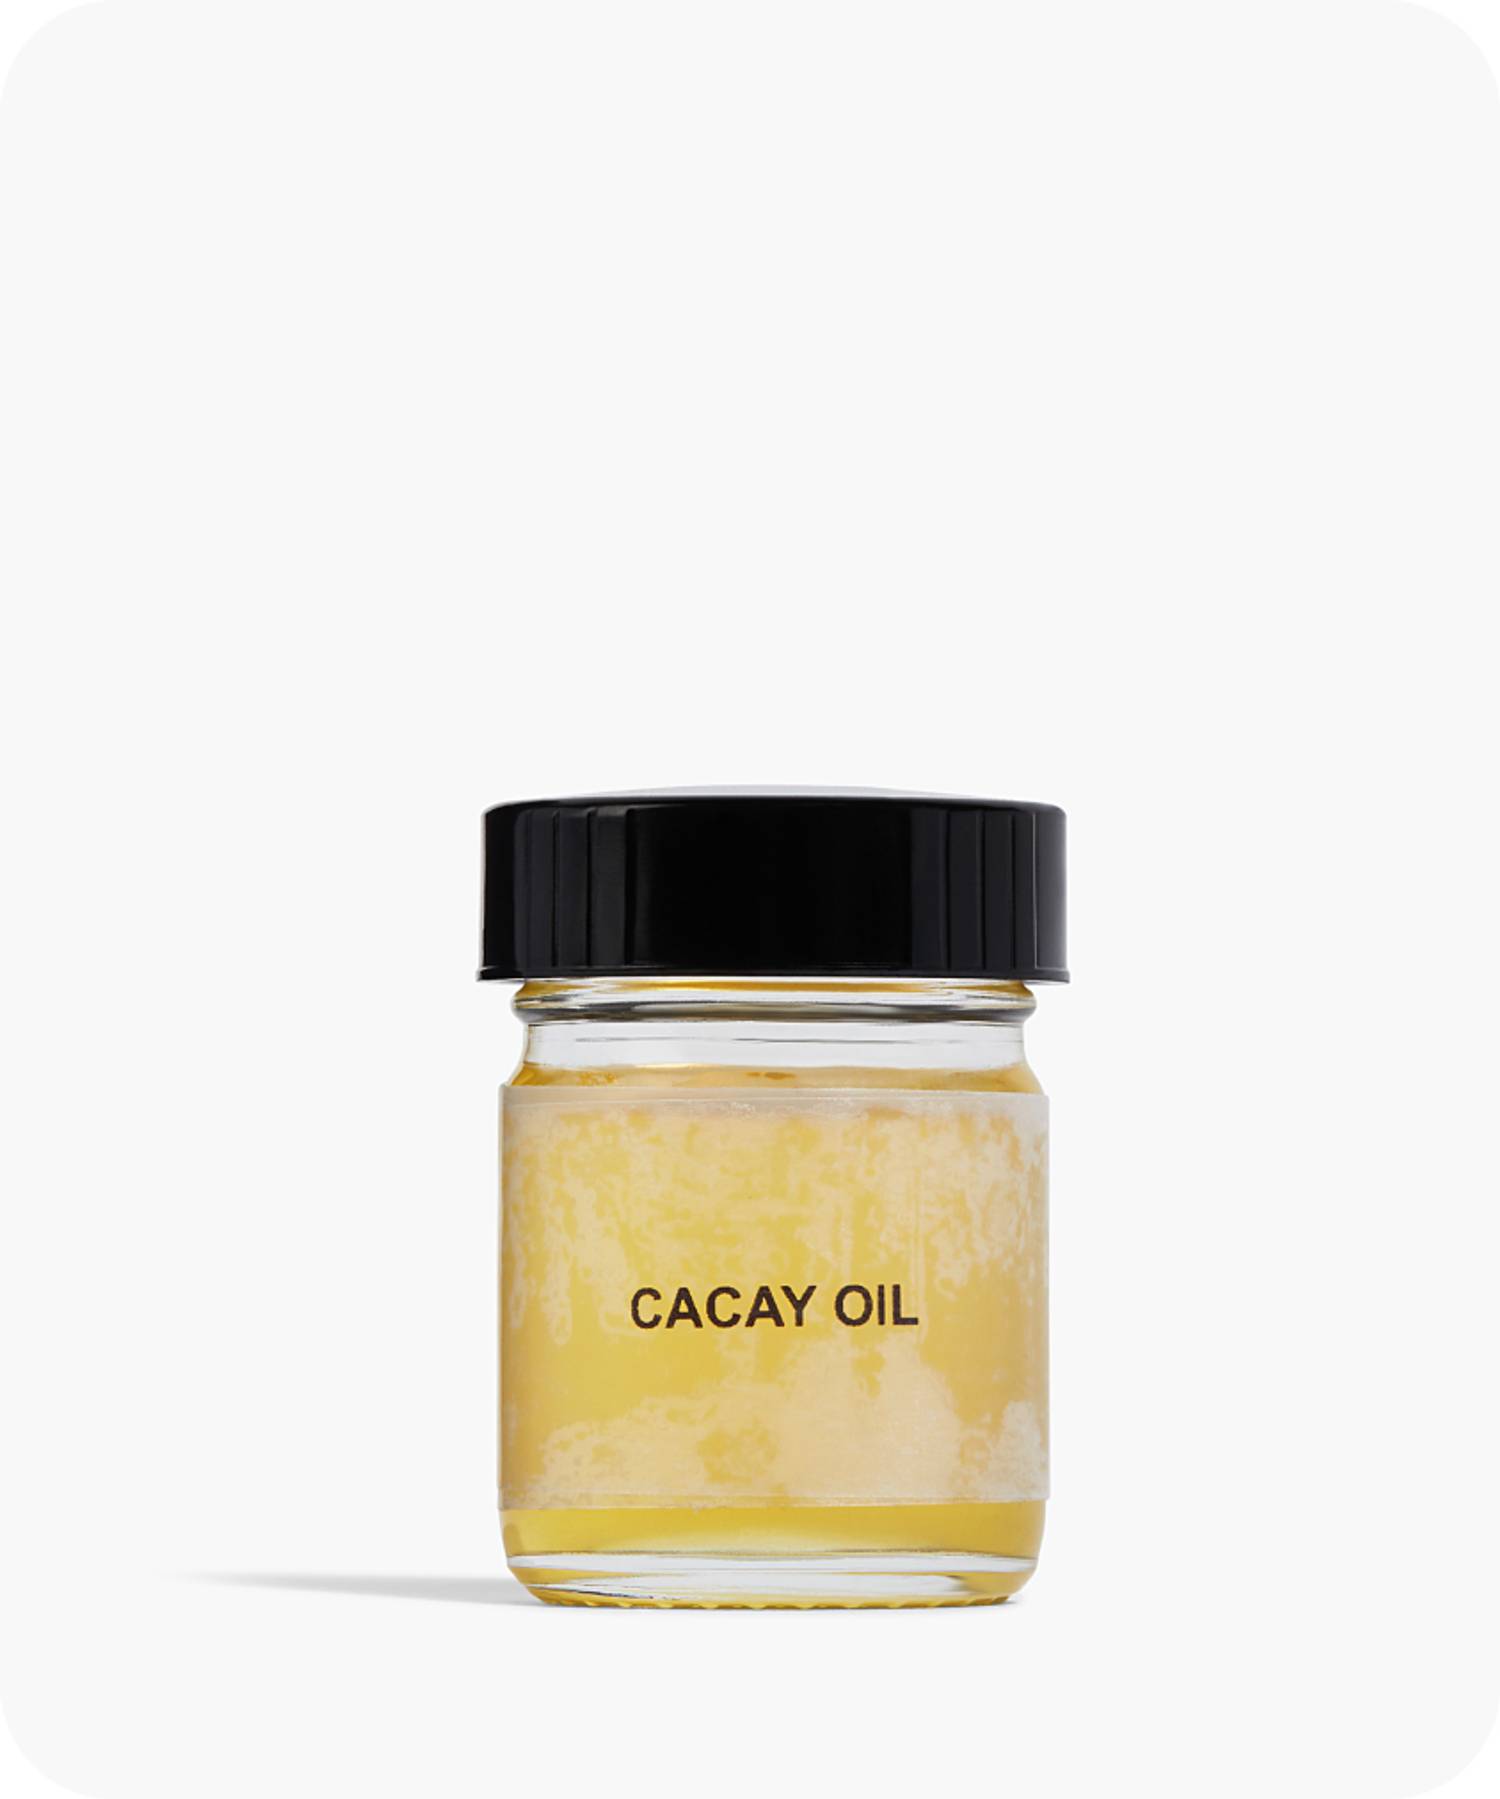 Cacay Oil in natural form